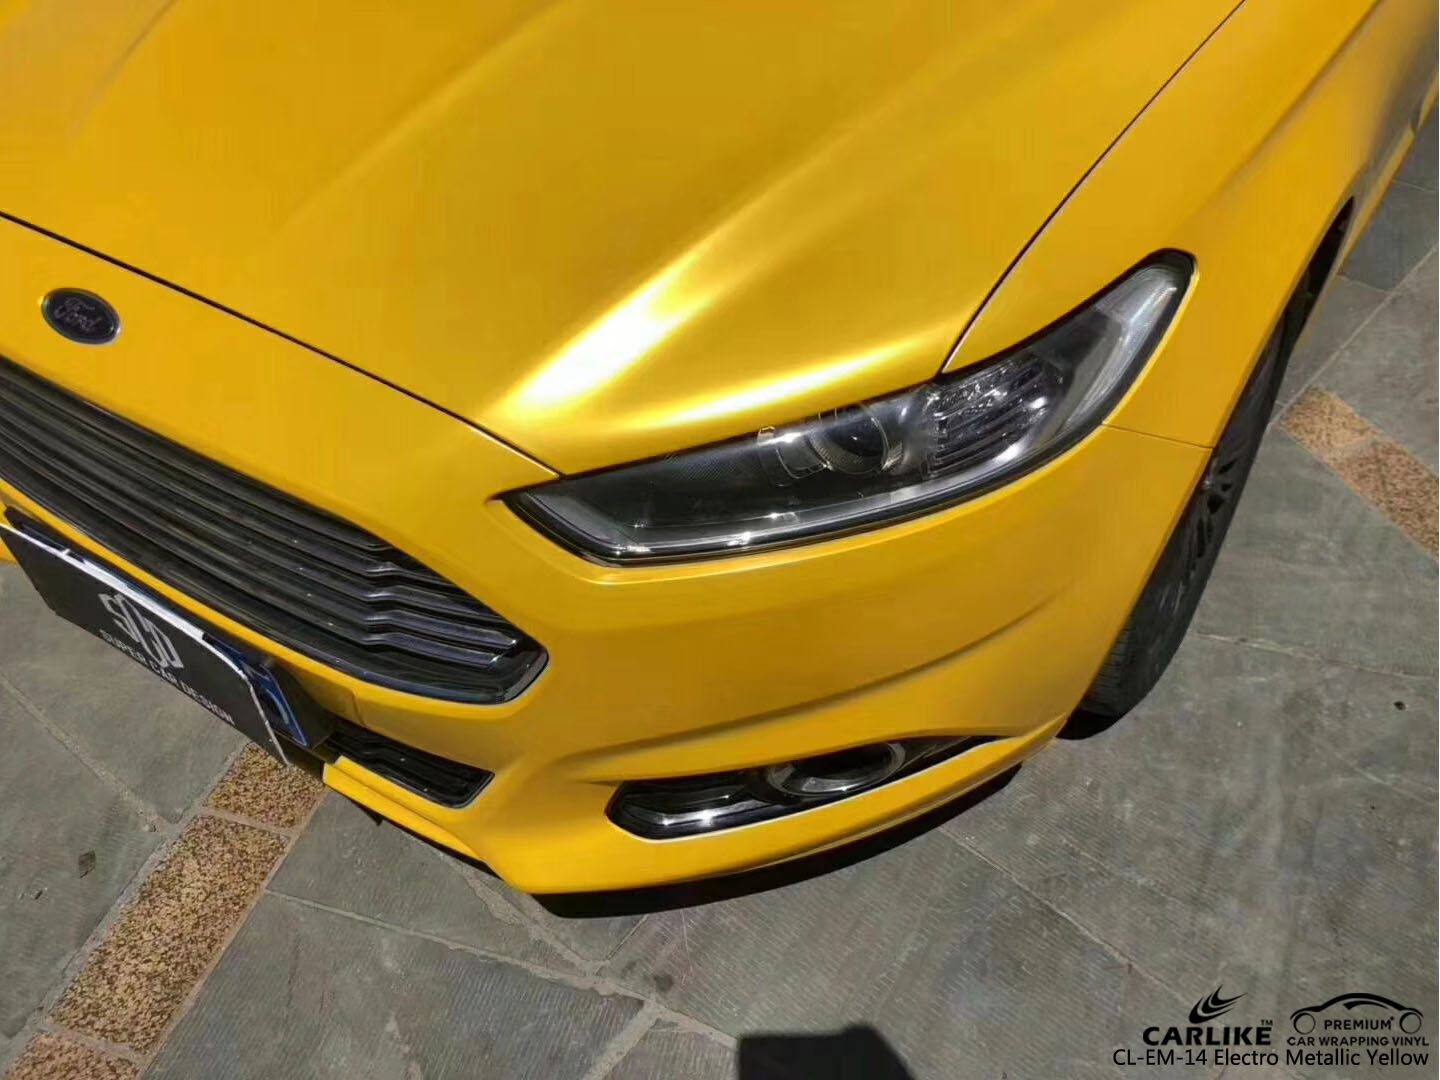 CARLIKE CL-EM-14 ELECTRO METALLIC YELLOW VINYL FOR FORD